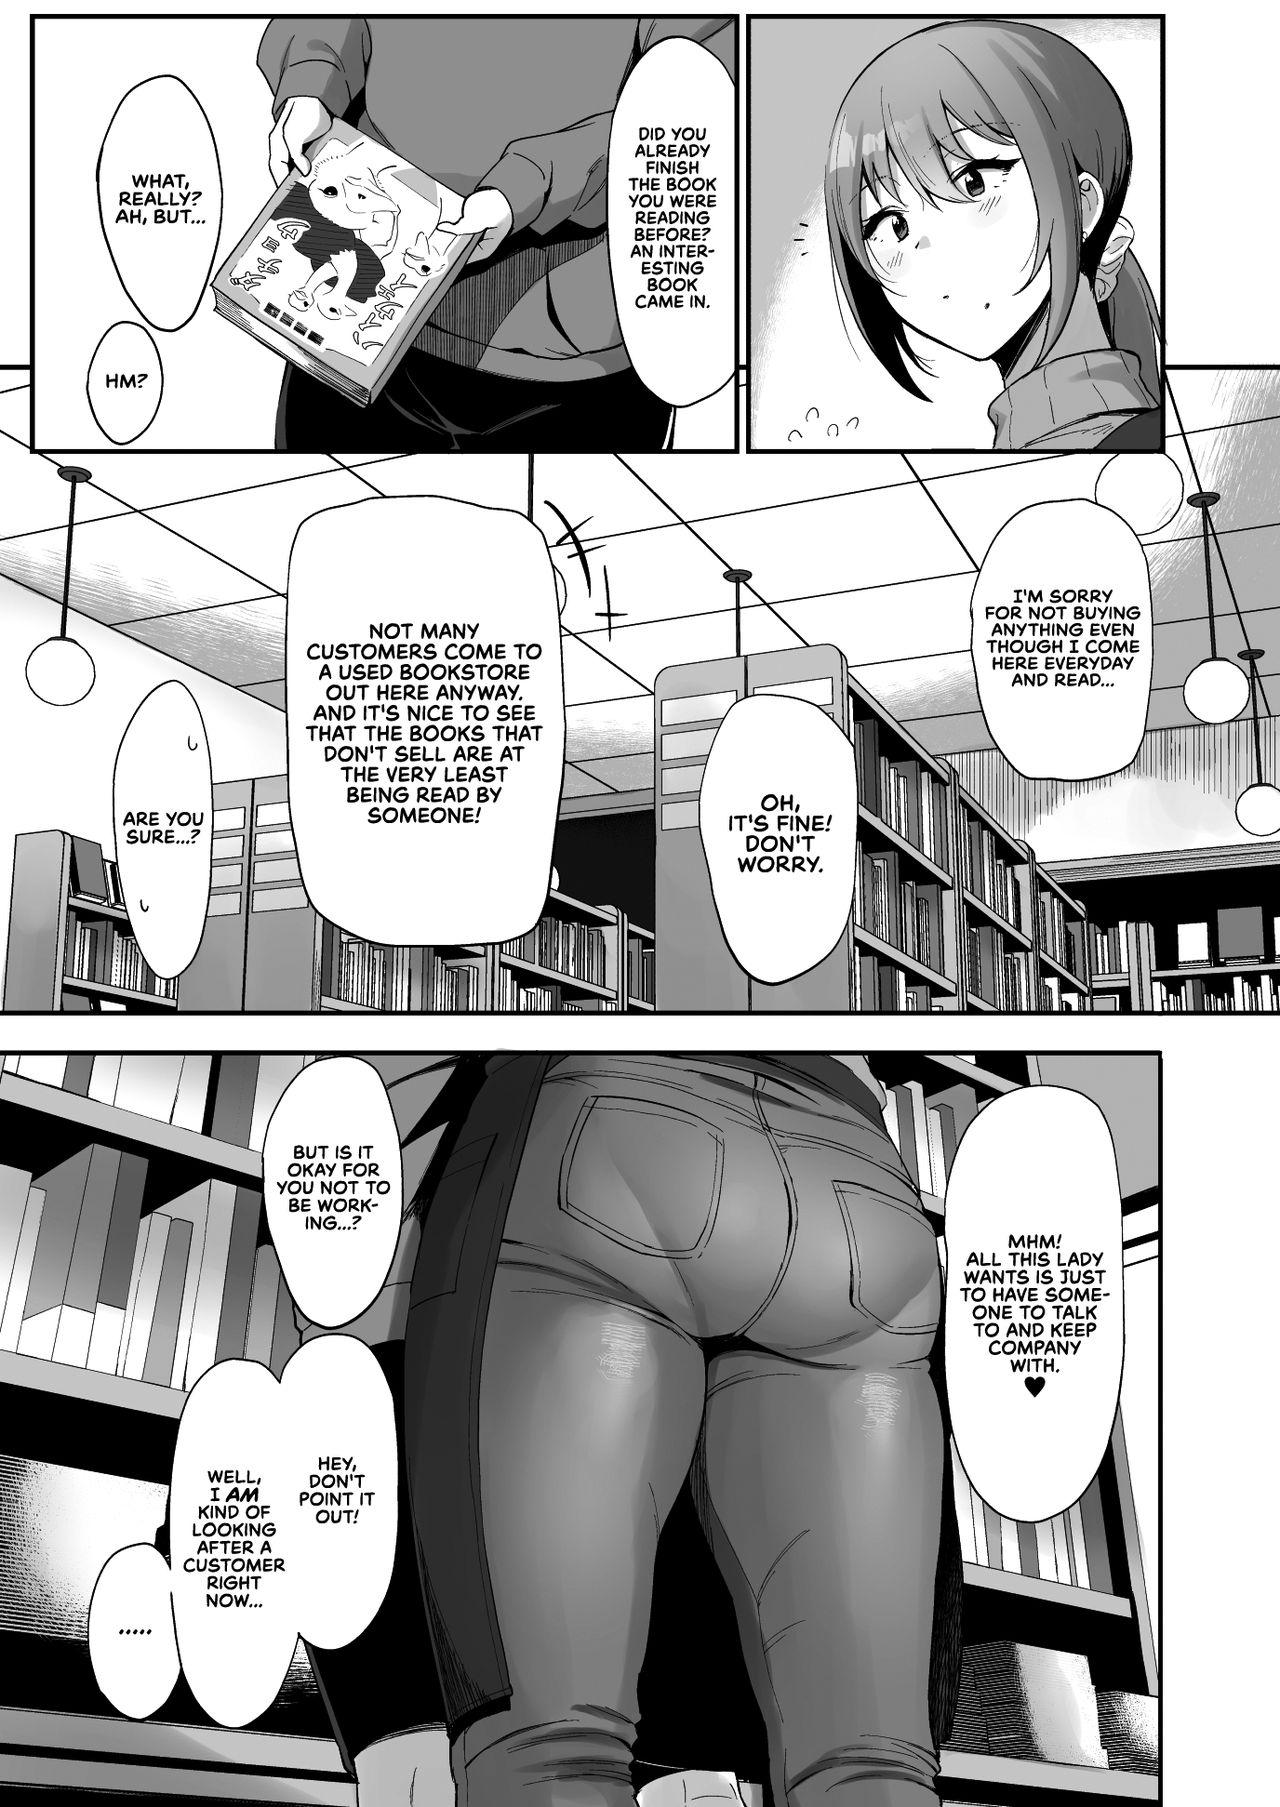 Price Furuhonya no Onee-san to | With The Lady From The Used Book Shop - Original Beard - Page 6